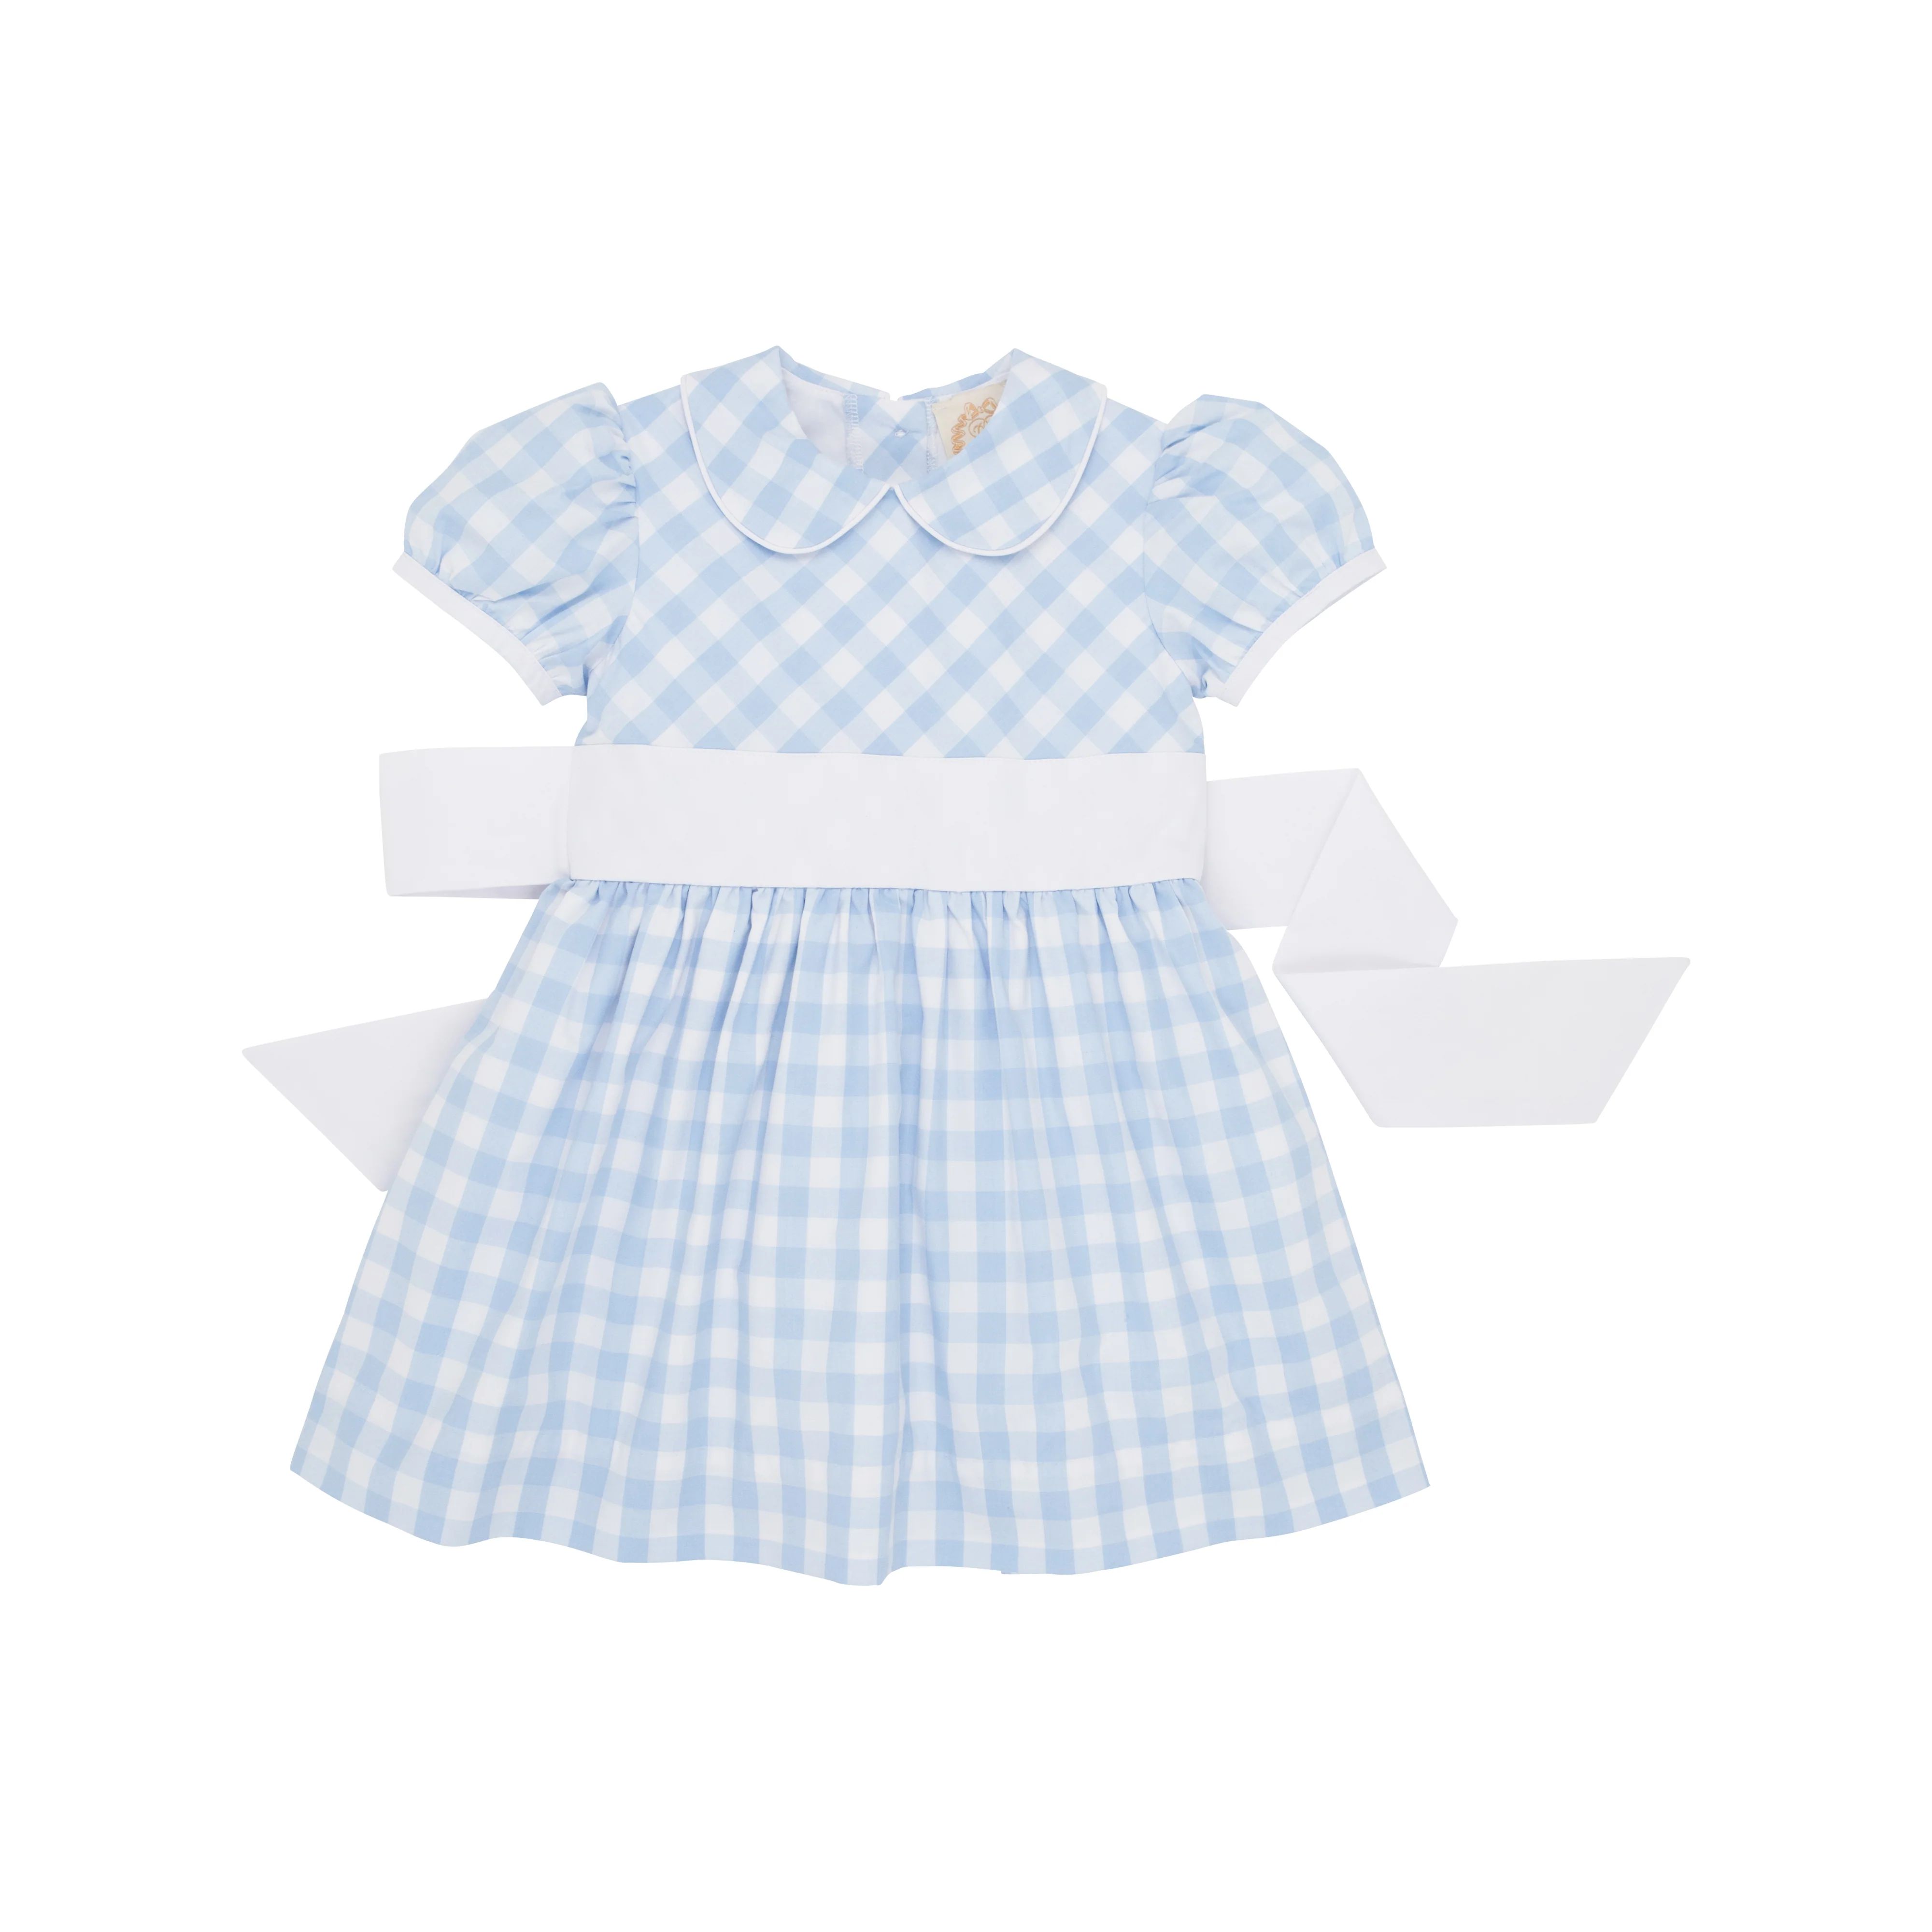 Cindy Lou Sash Dress - Beale Street Blue Check with Worth Avenue White | The Beaufort Bonnet Company